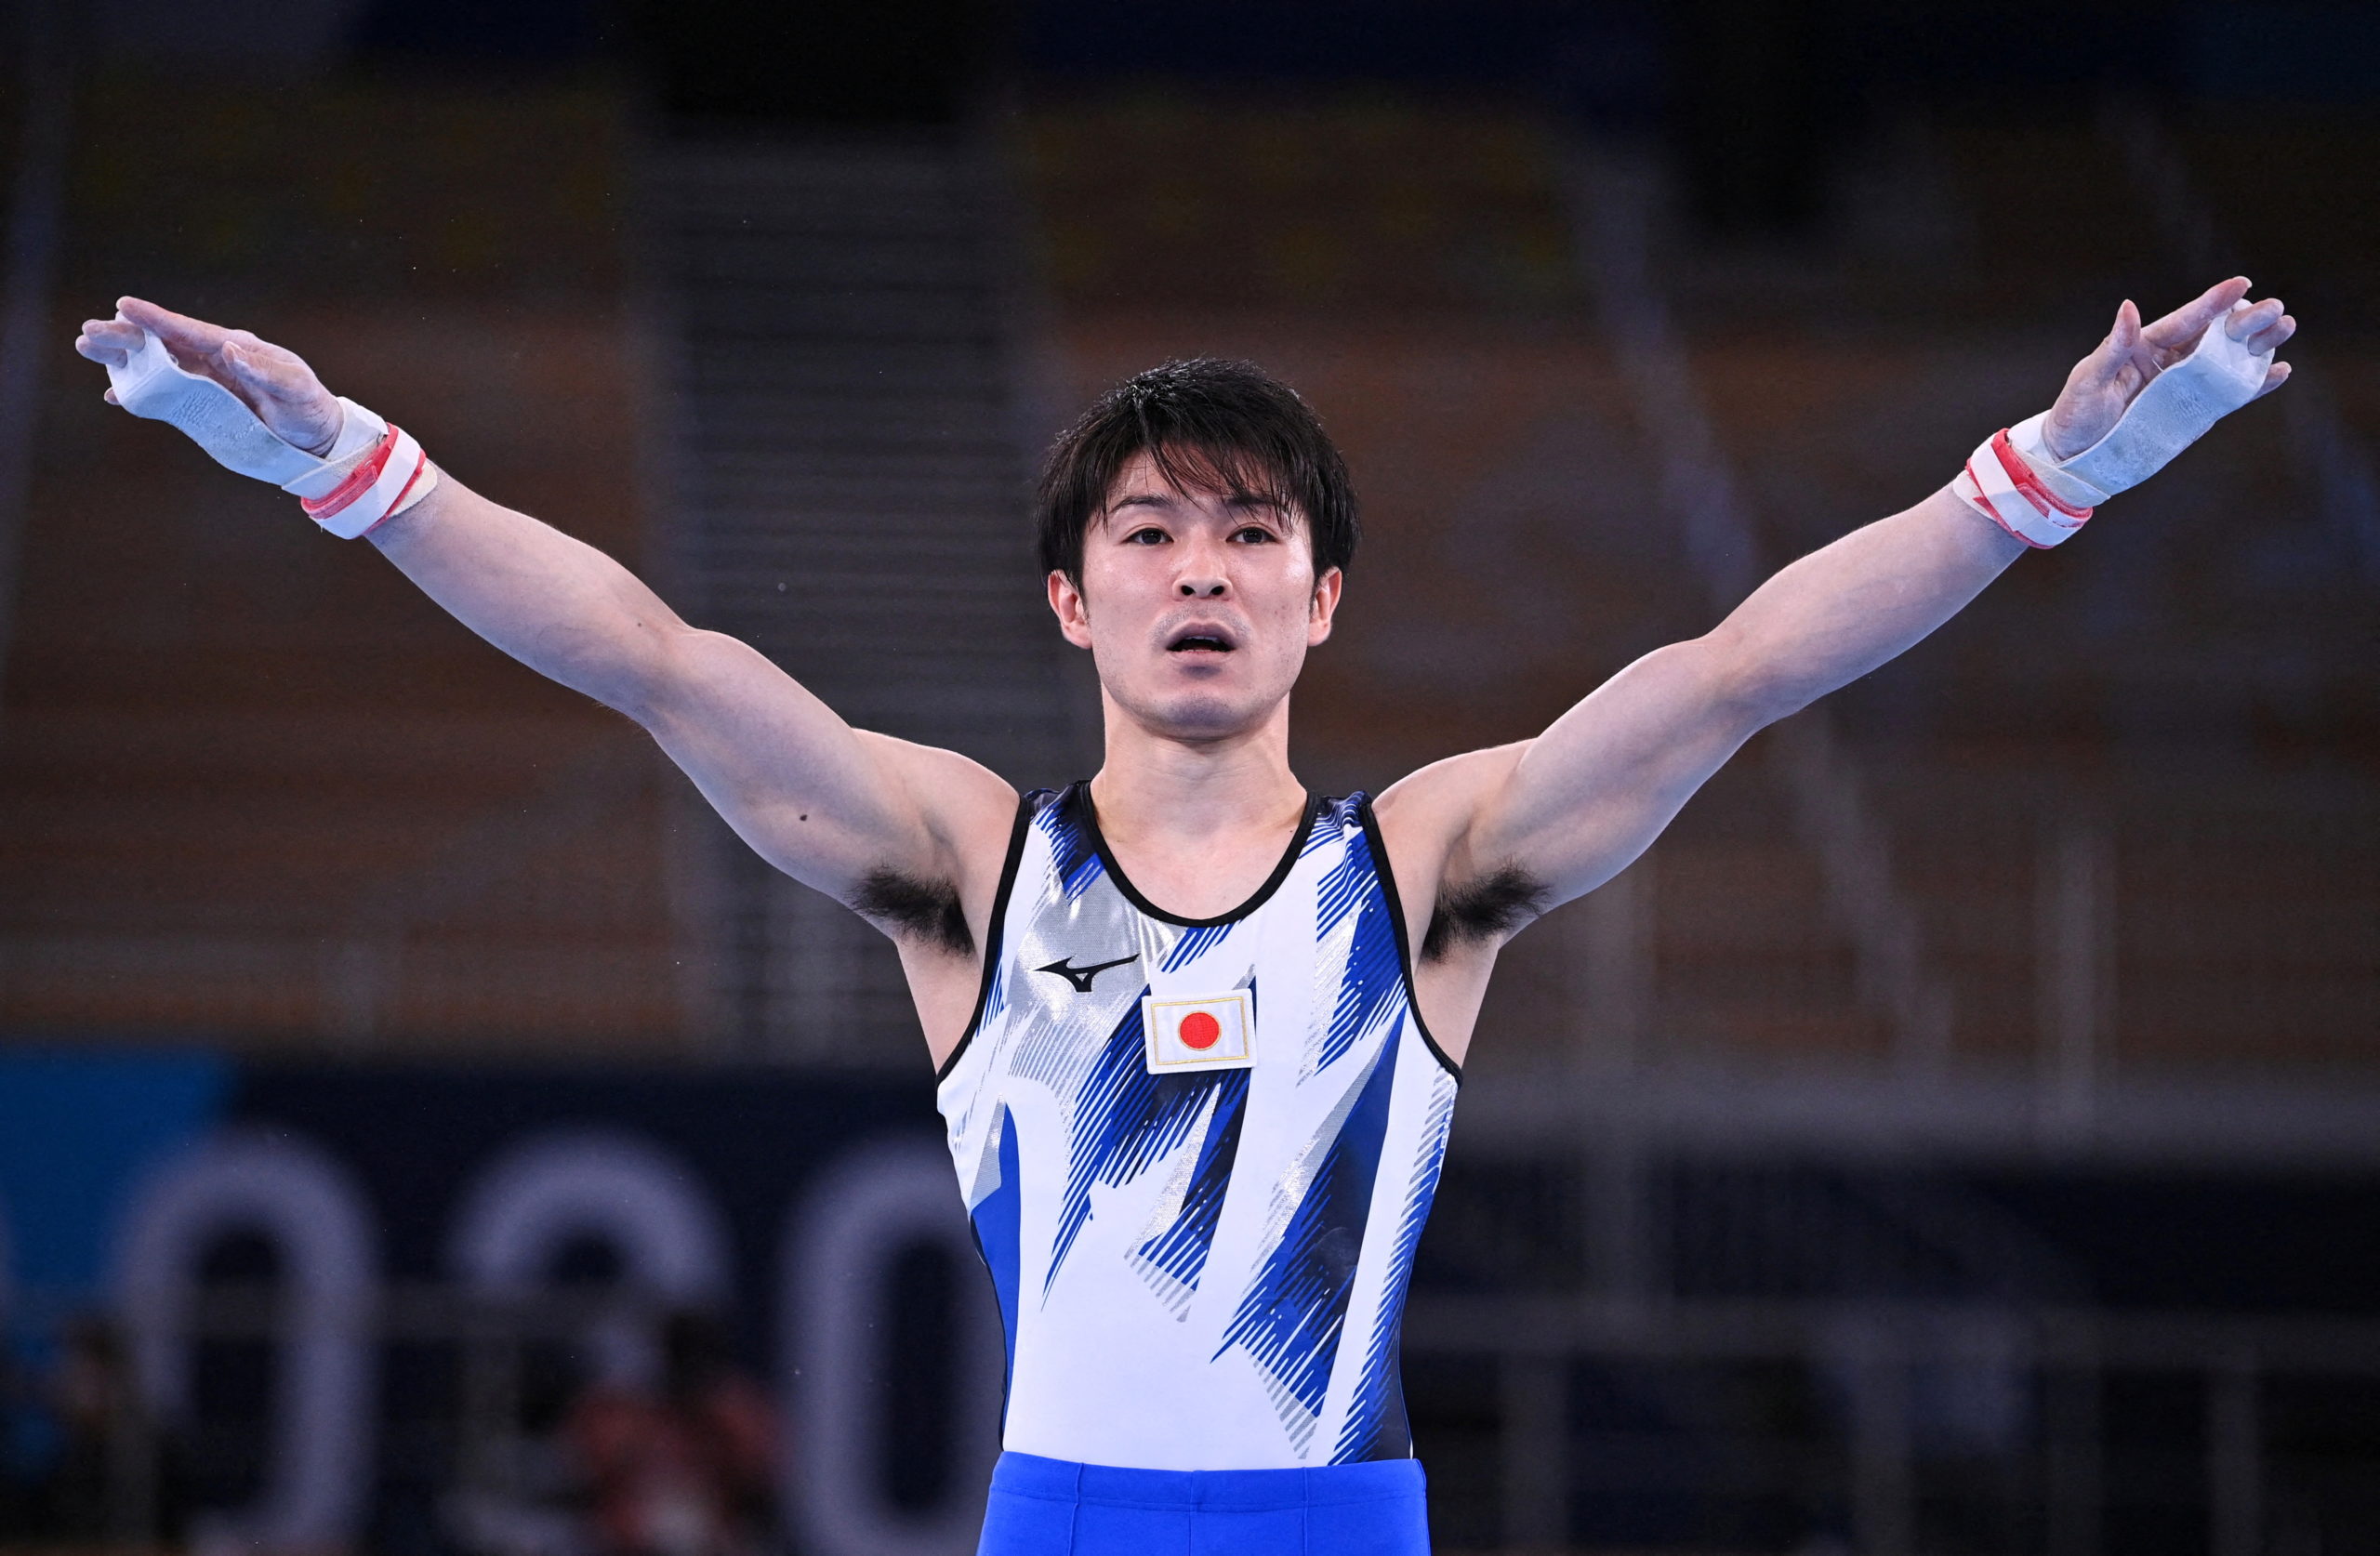 Kohei Uchimura of Japan stands after competing on the horizontal bar.